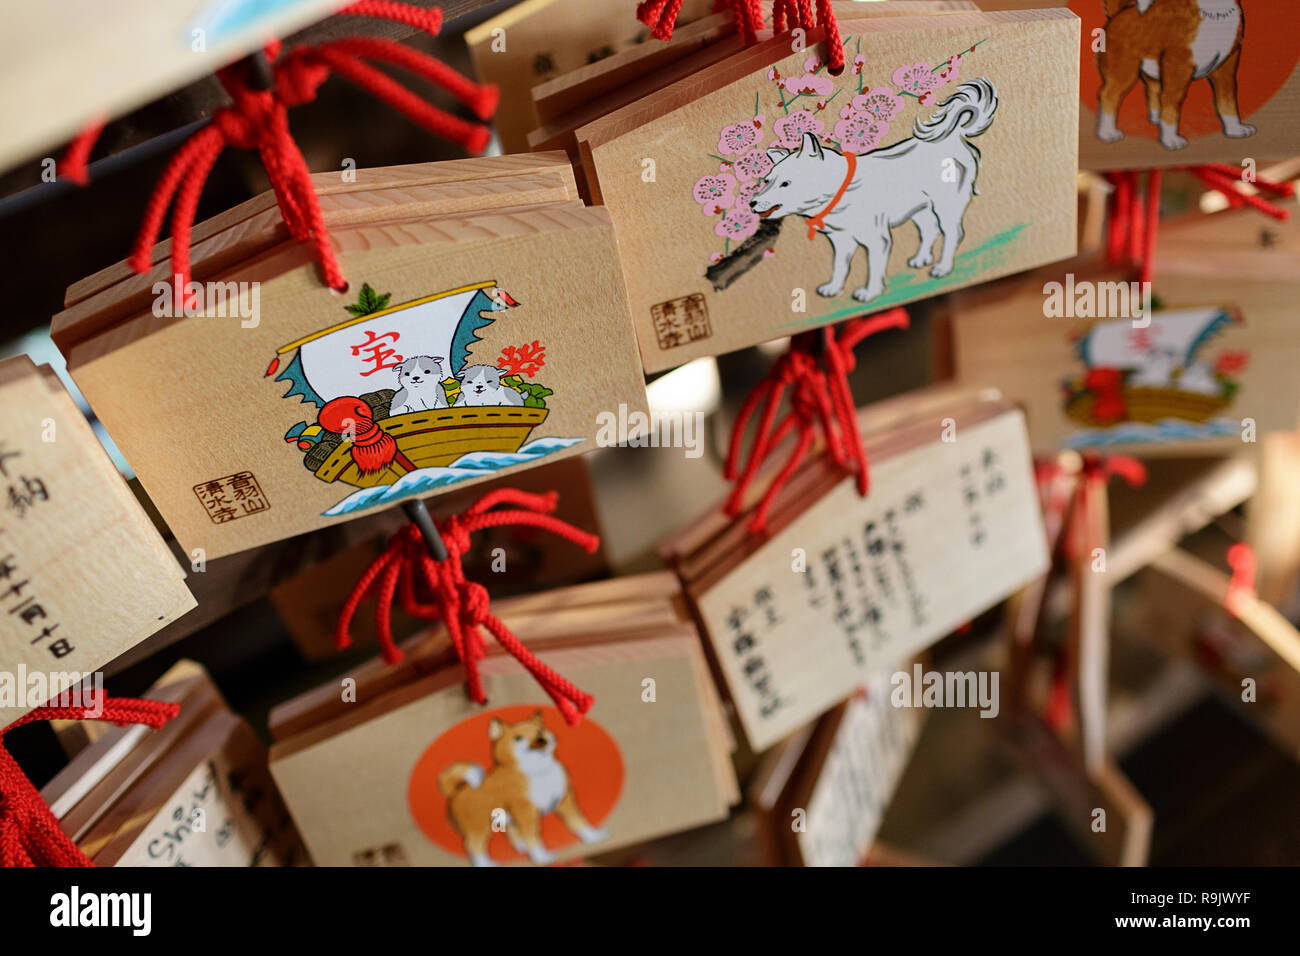 Wooden ema wish plaques, Japan Stock Photo